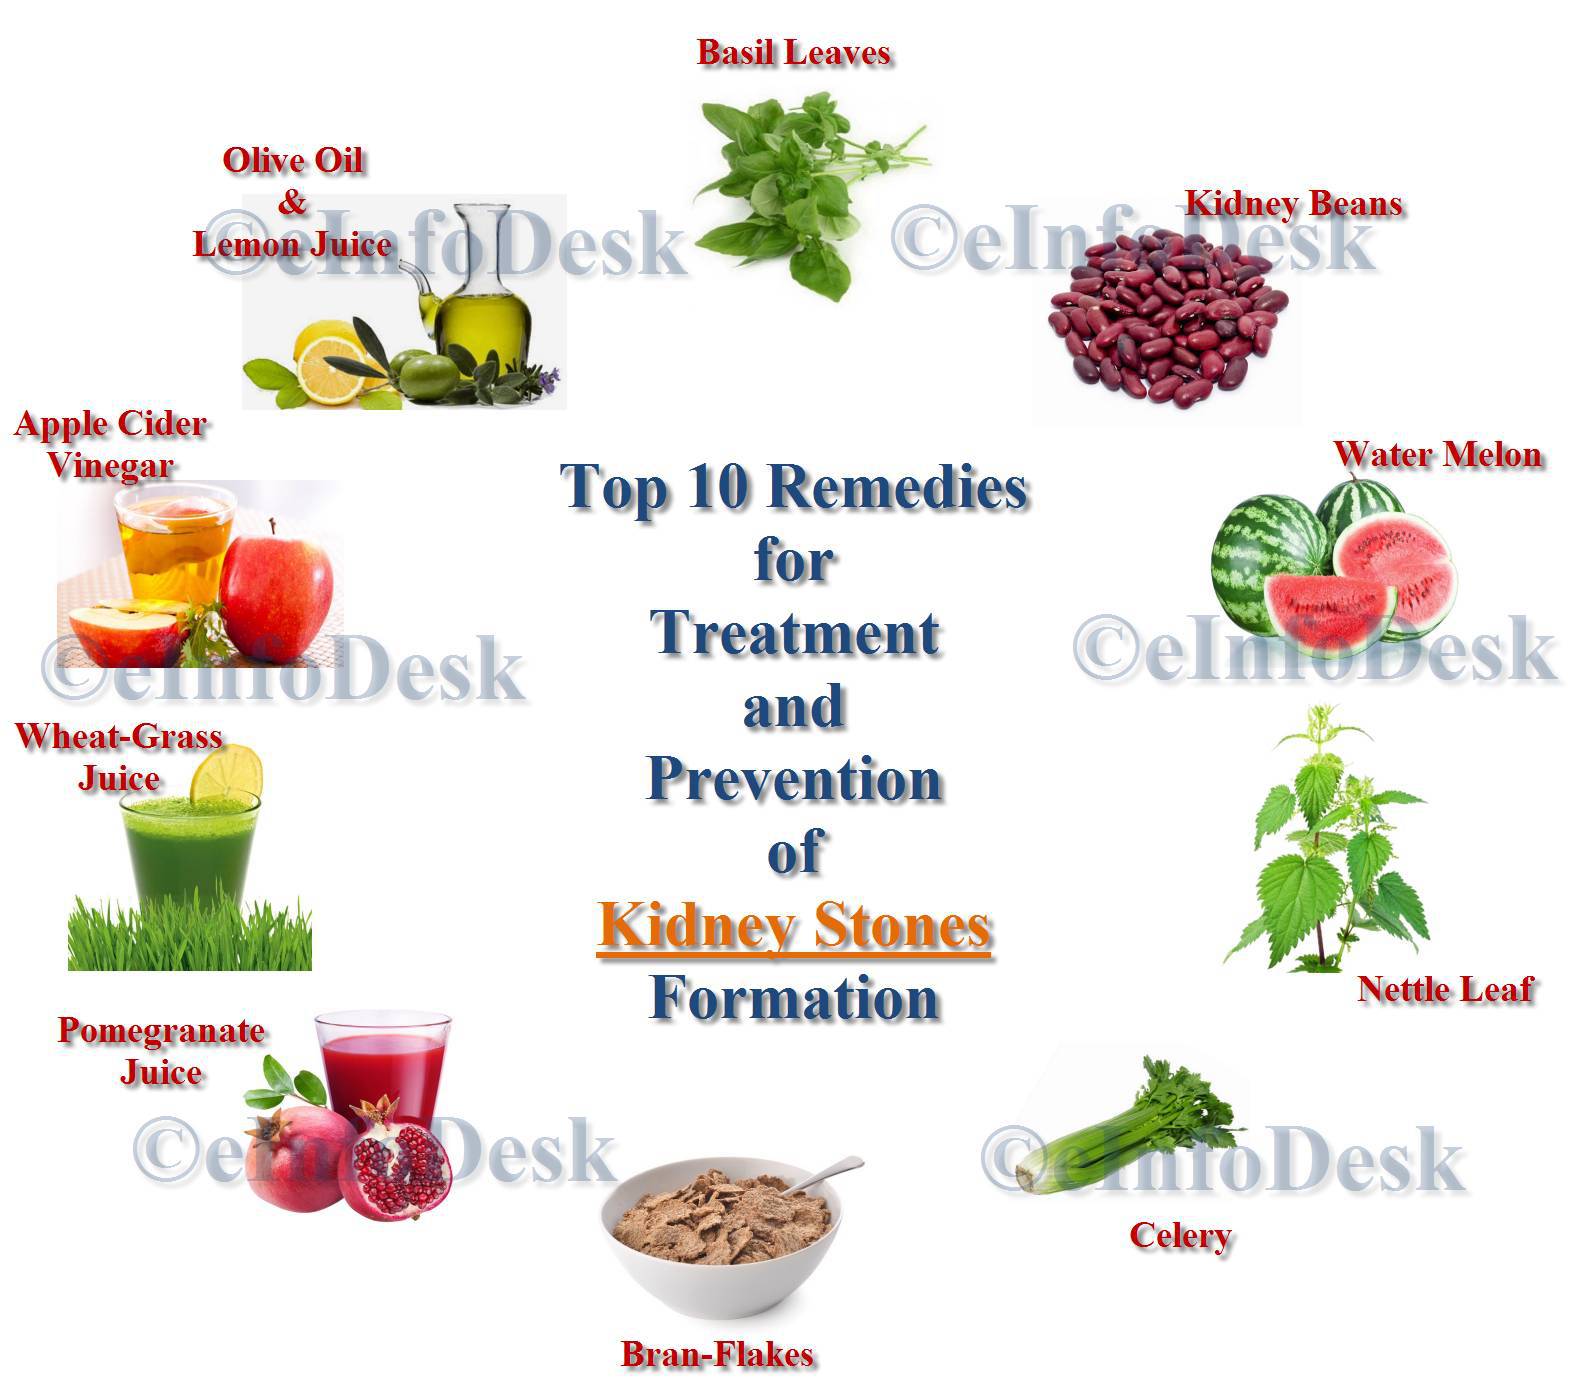 Natural Remedies for Treatment and Prevention of Kidney Stones or Renal Calculi or Nephrolithiasis Formation